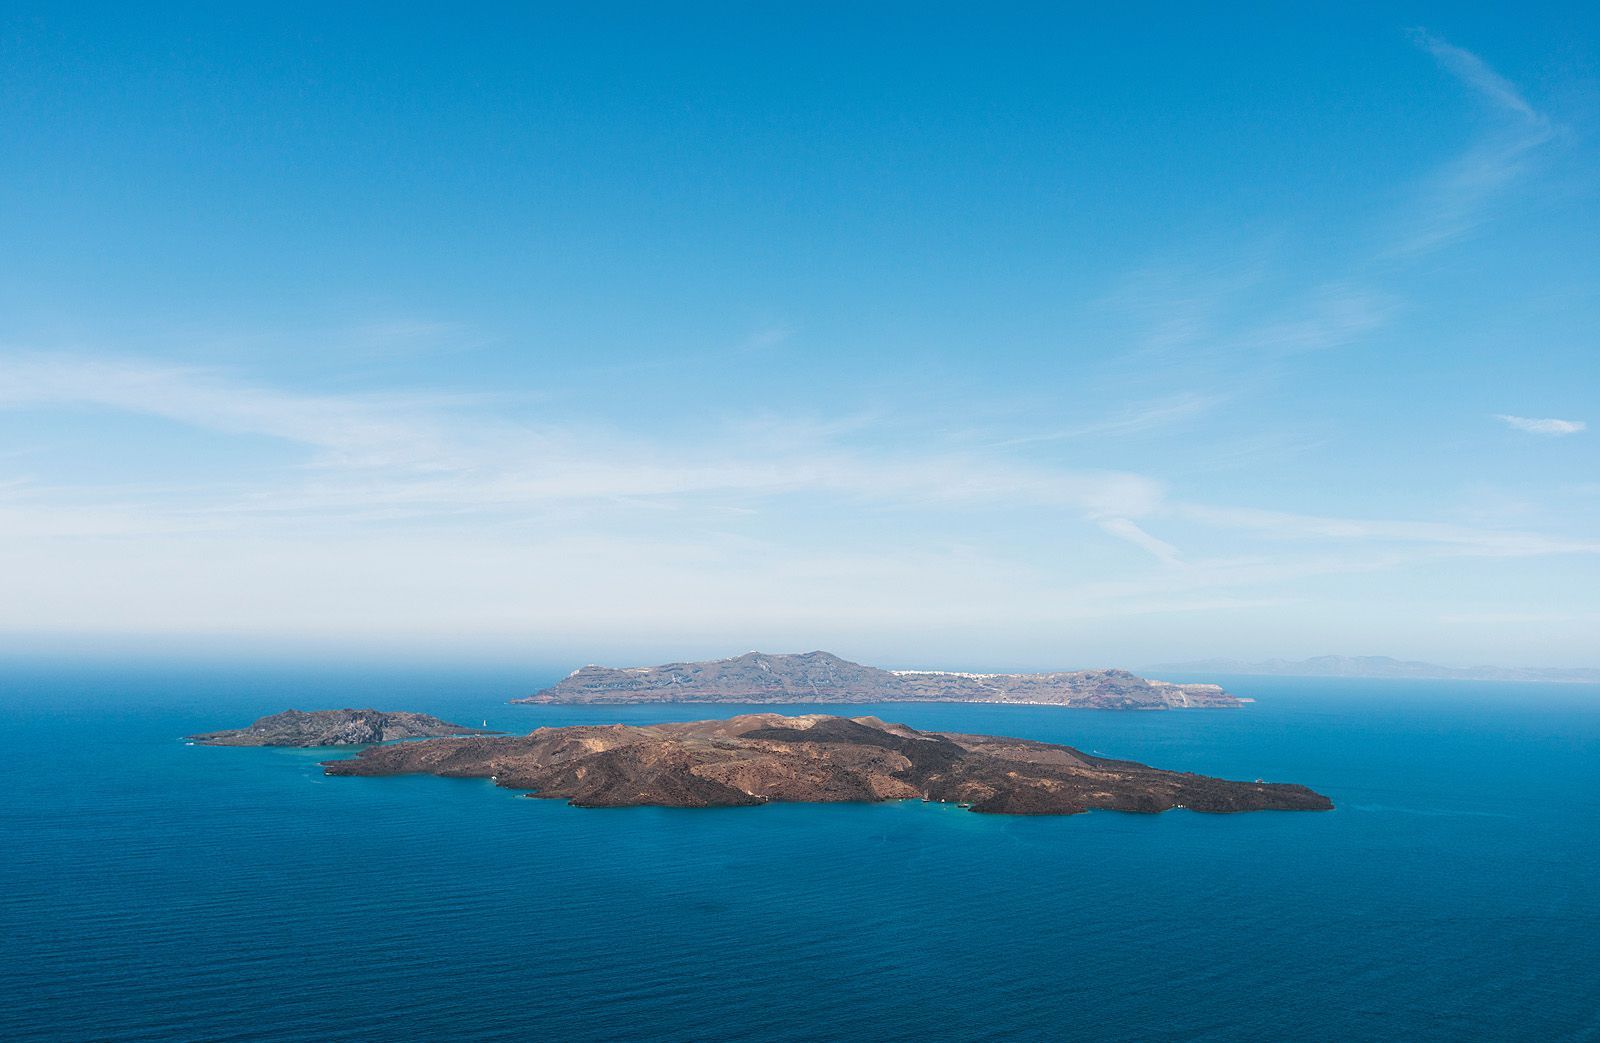 The view of the Caldera Islets as seen from Santorini Island.